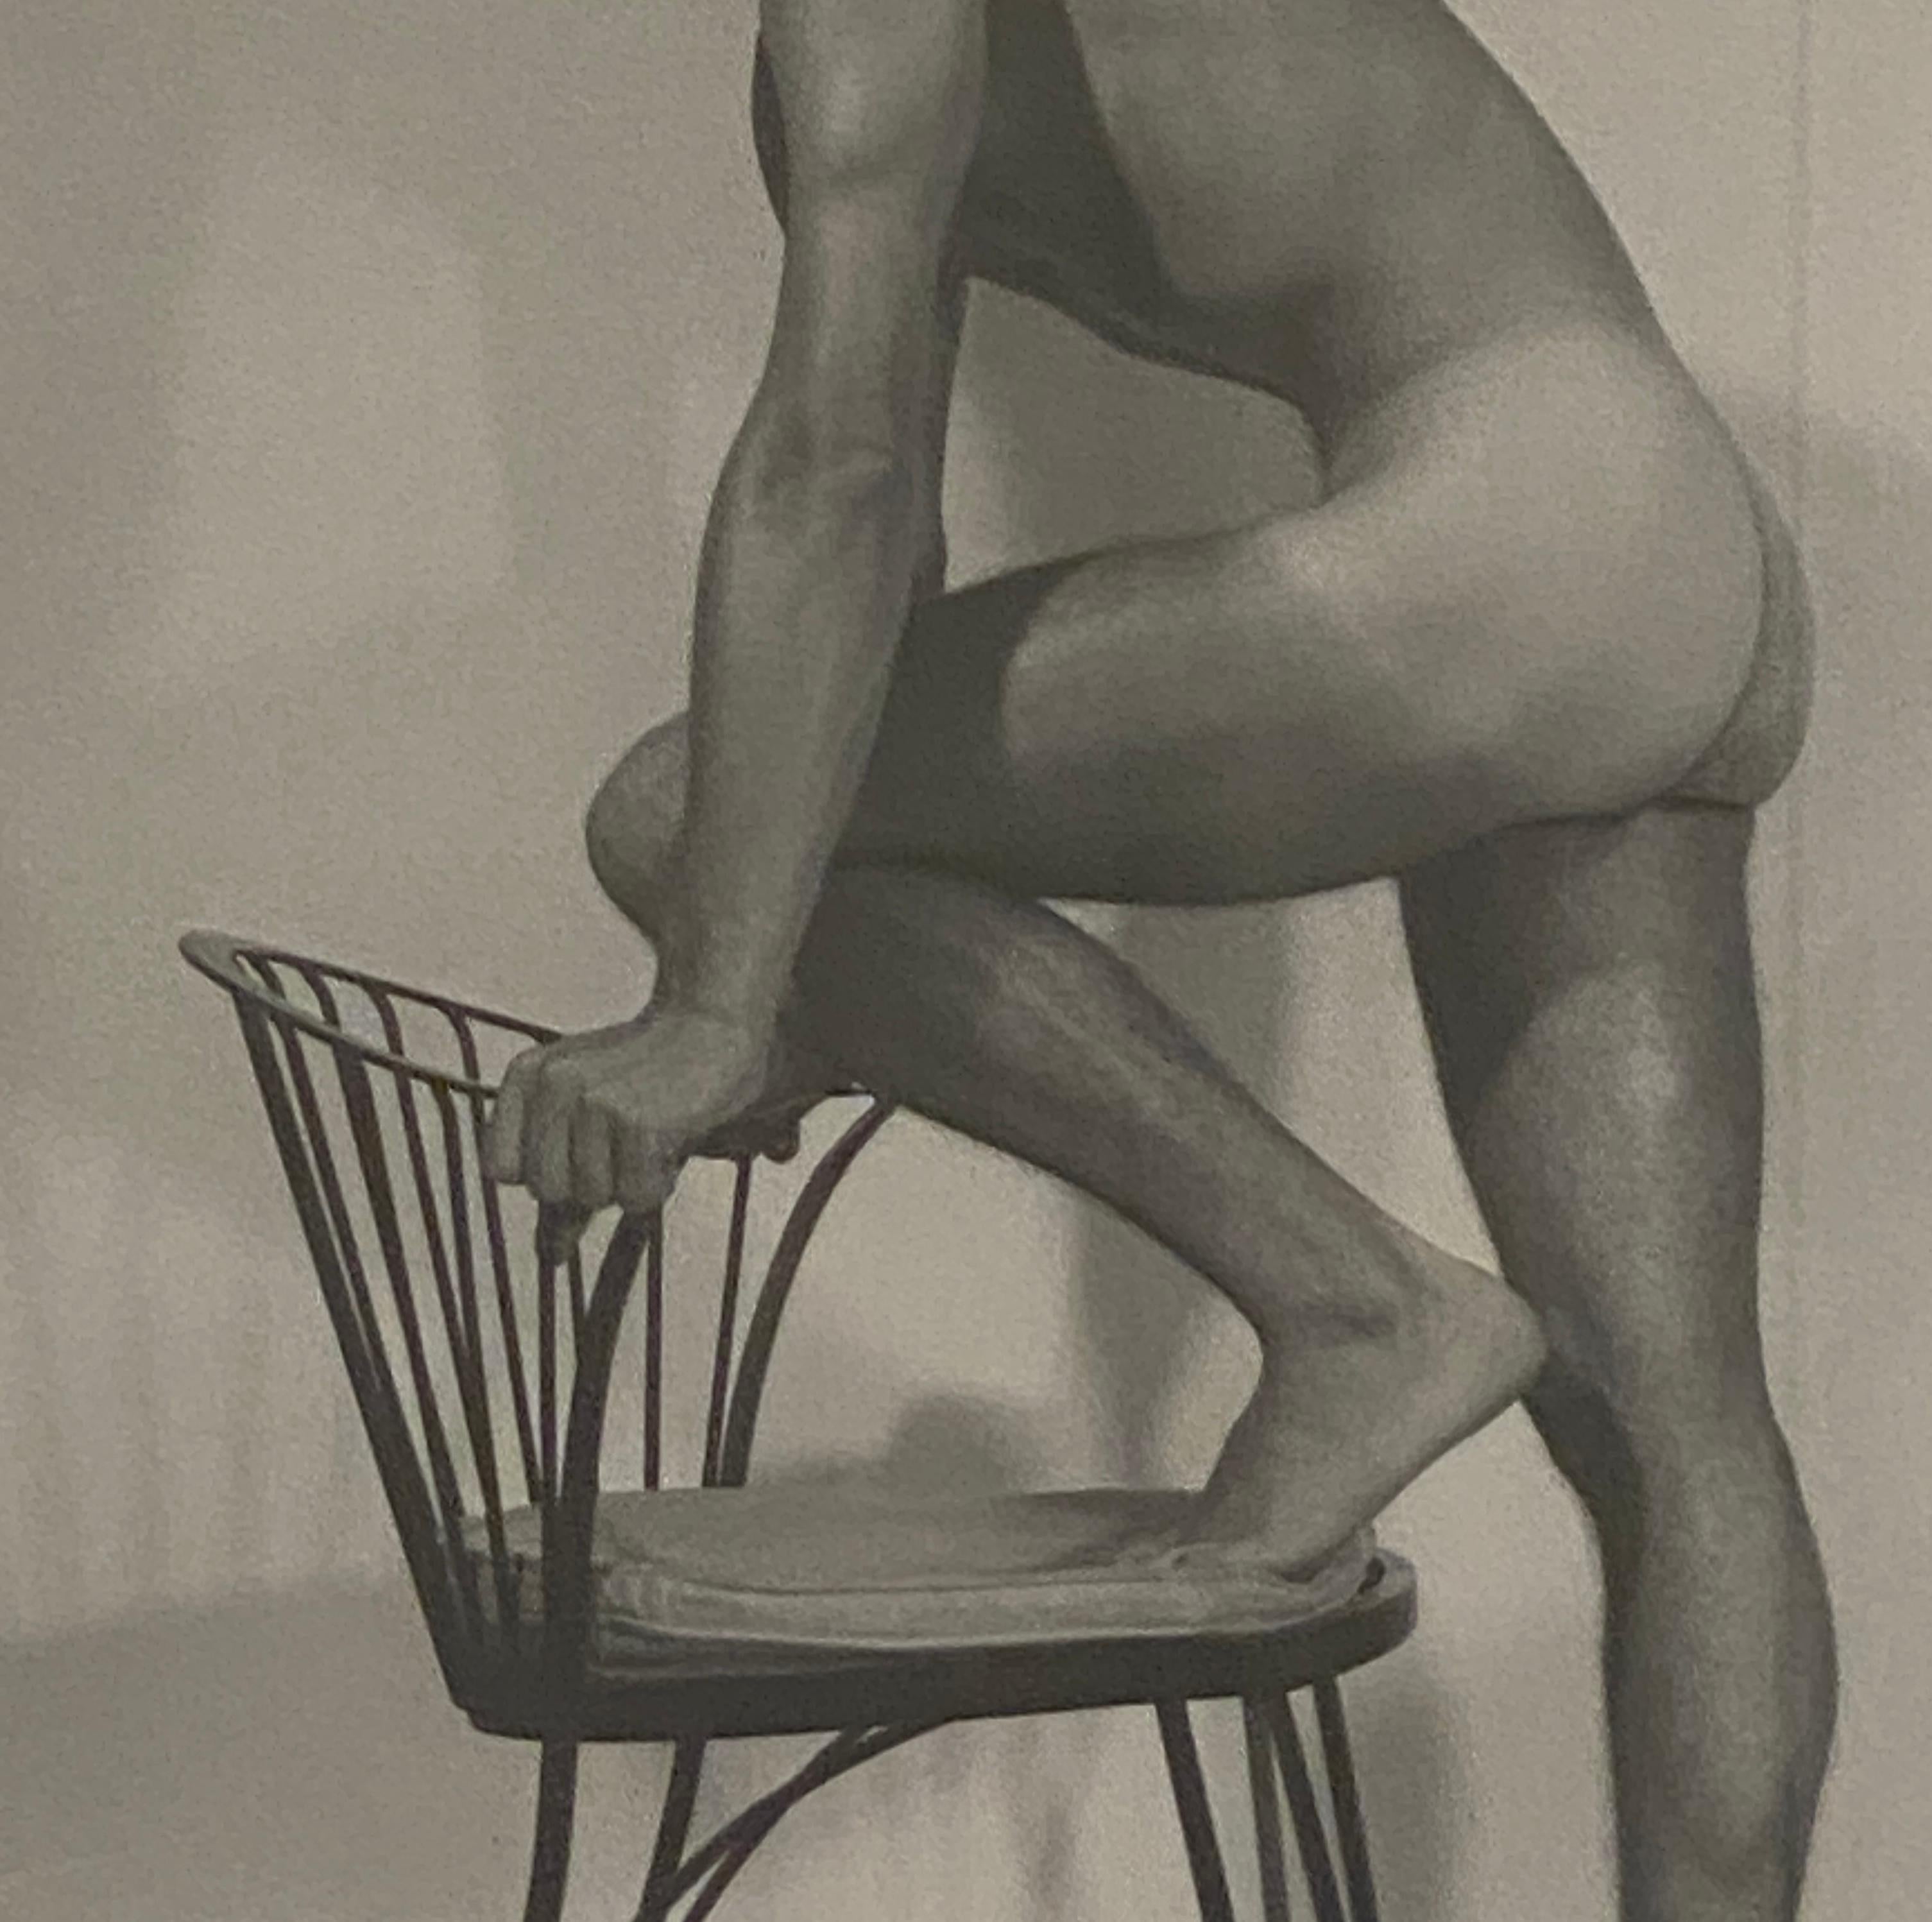 Bruce of LA Original 1950s Male Physique Photo Model Barry Adkins In Good Condition For Sale In Palm Springs, CA